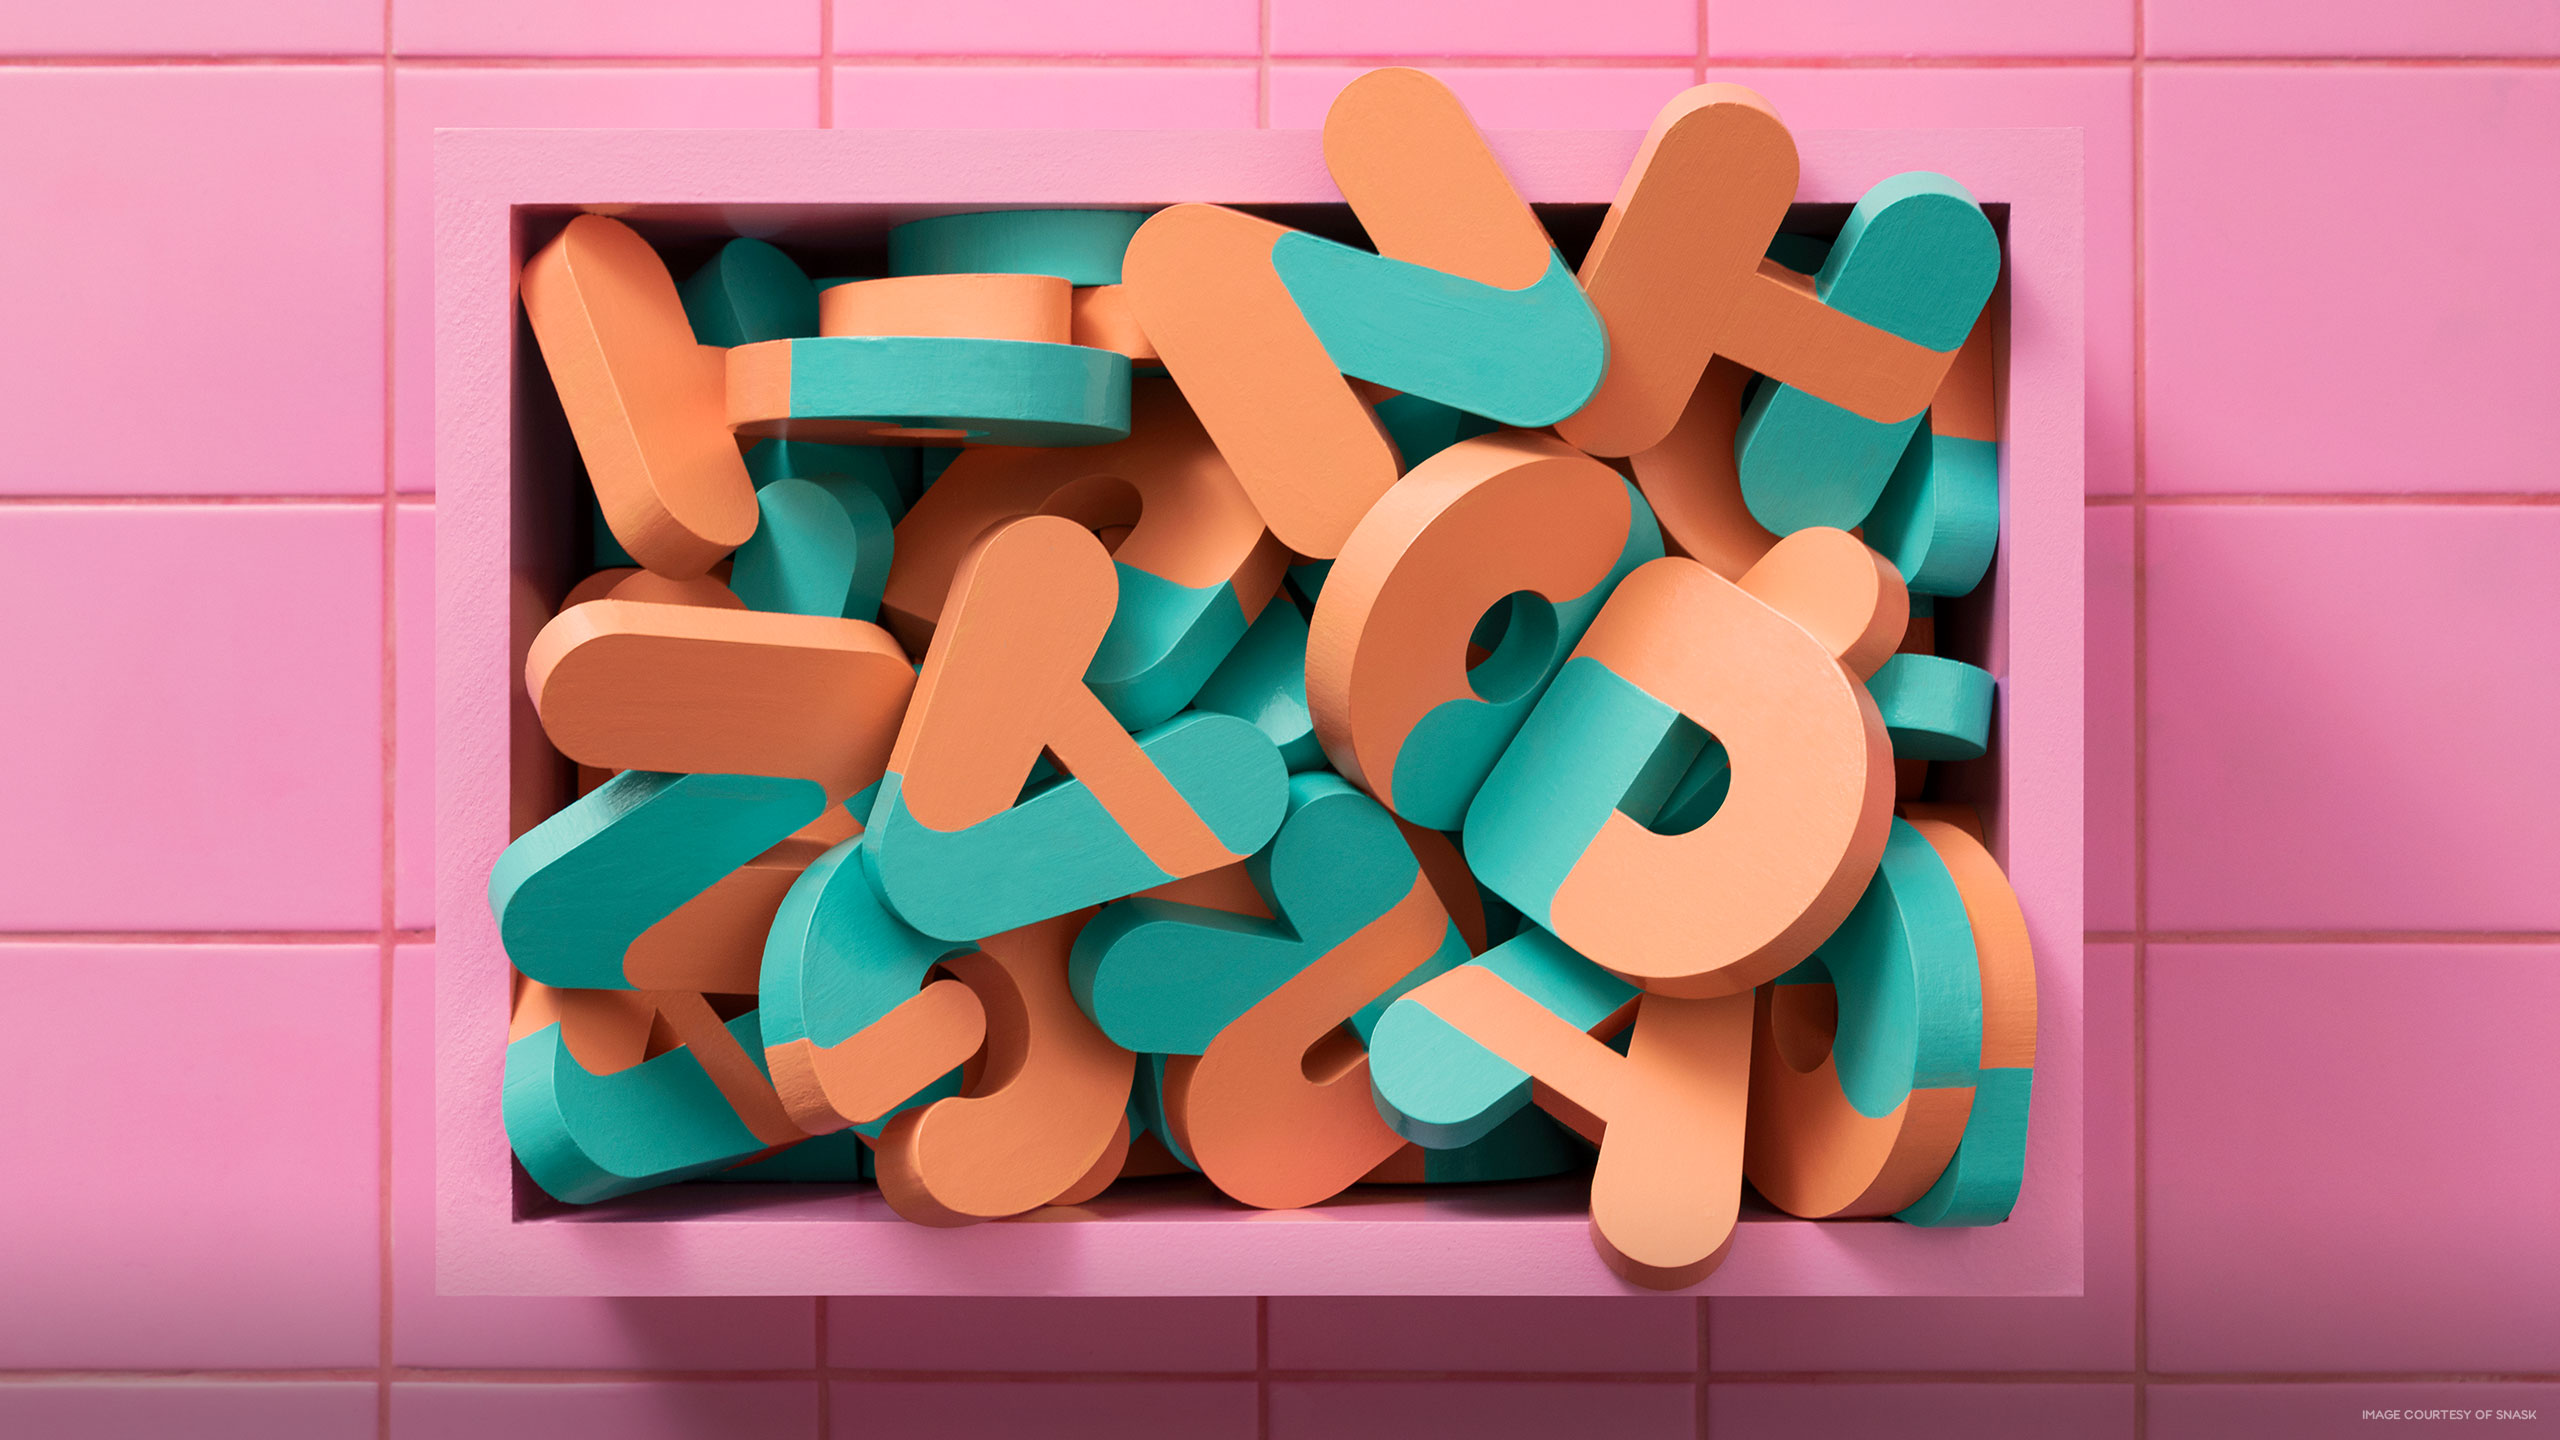 Box of 3d letters